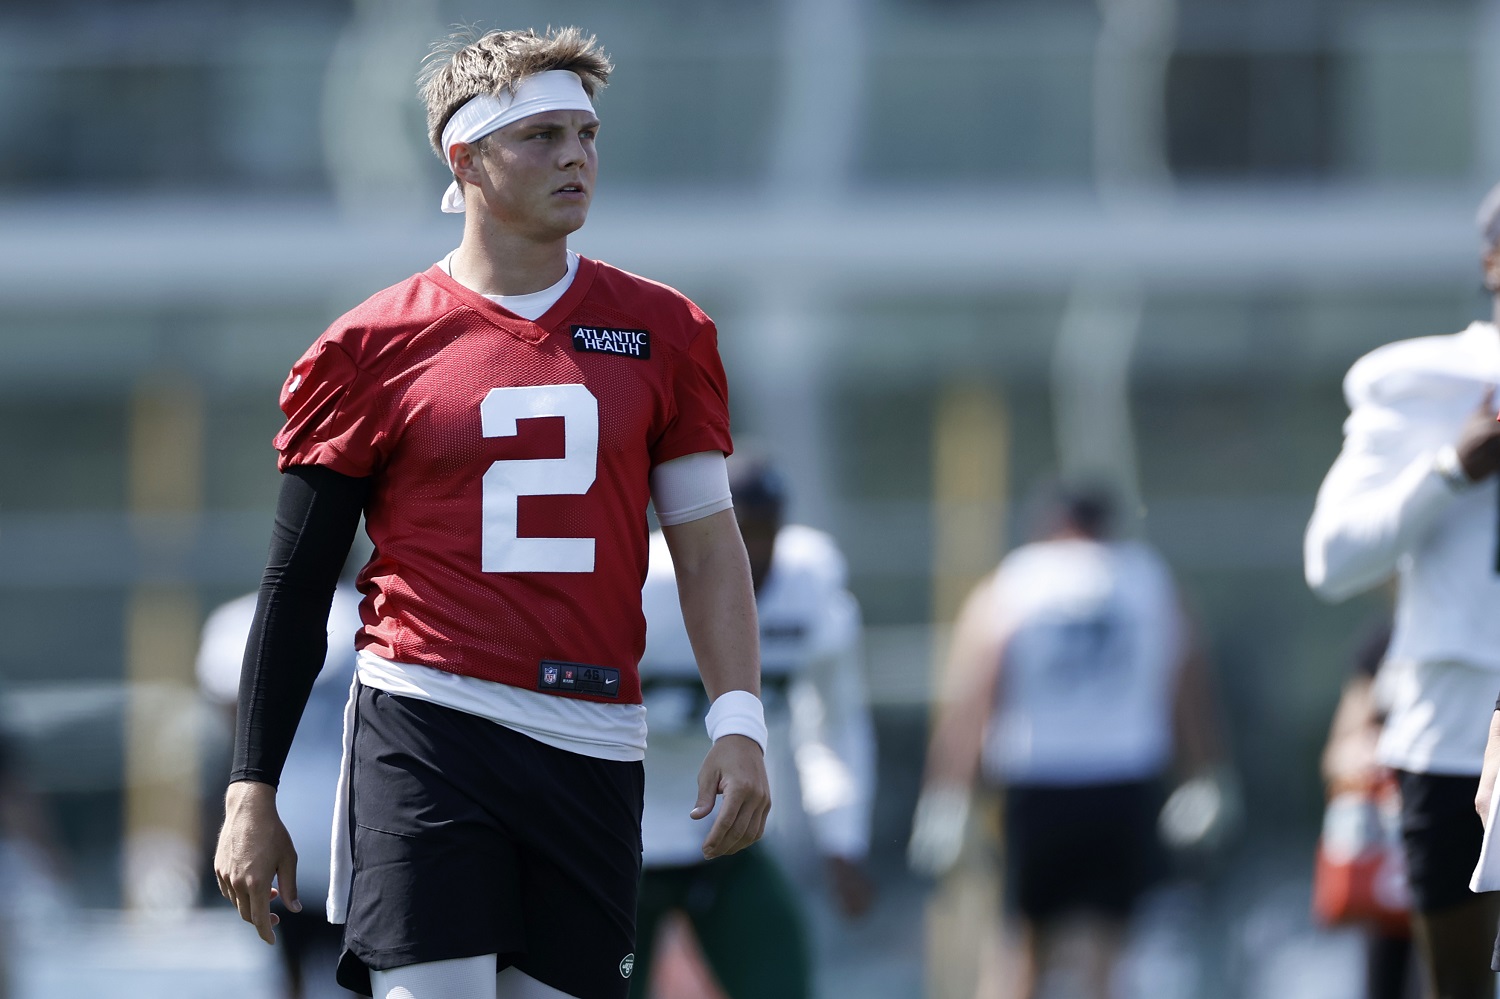 Zach Wilson of the New York Jets looks on during practice at Atlantic Health Jets Training Center on July 30, 2021.